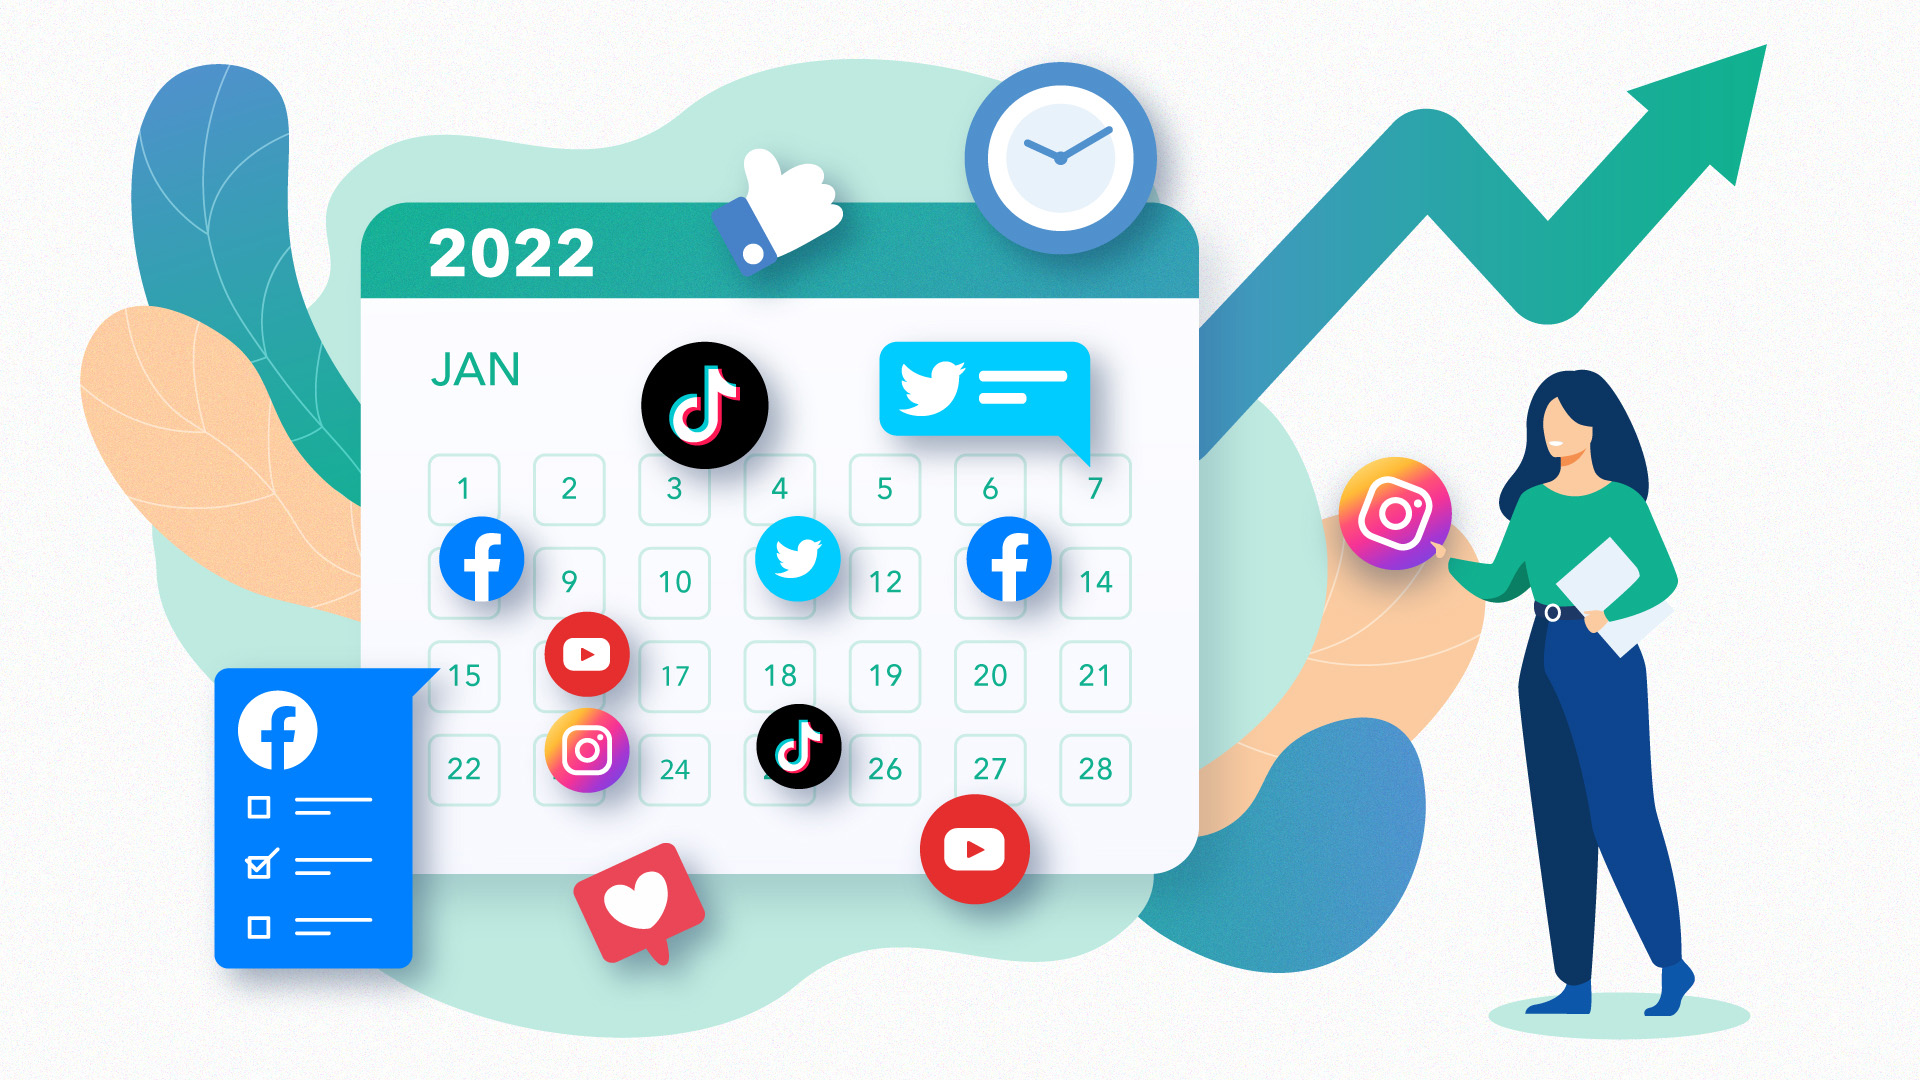 How to Organise Your Social Media Content in 2022?